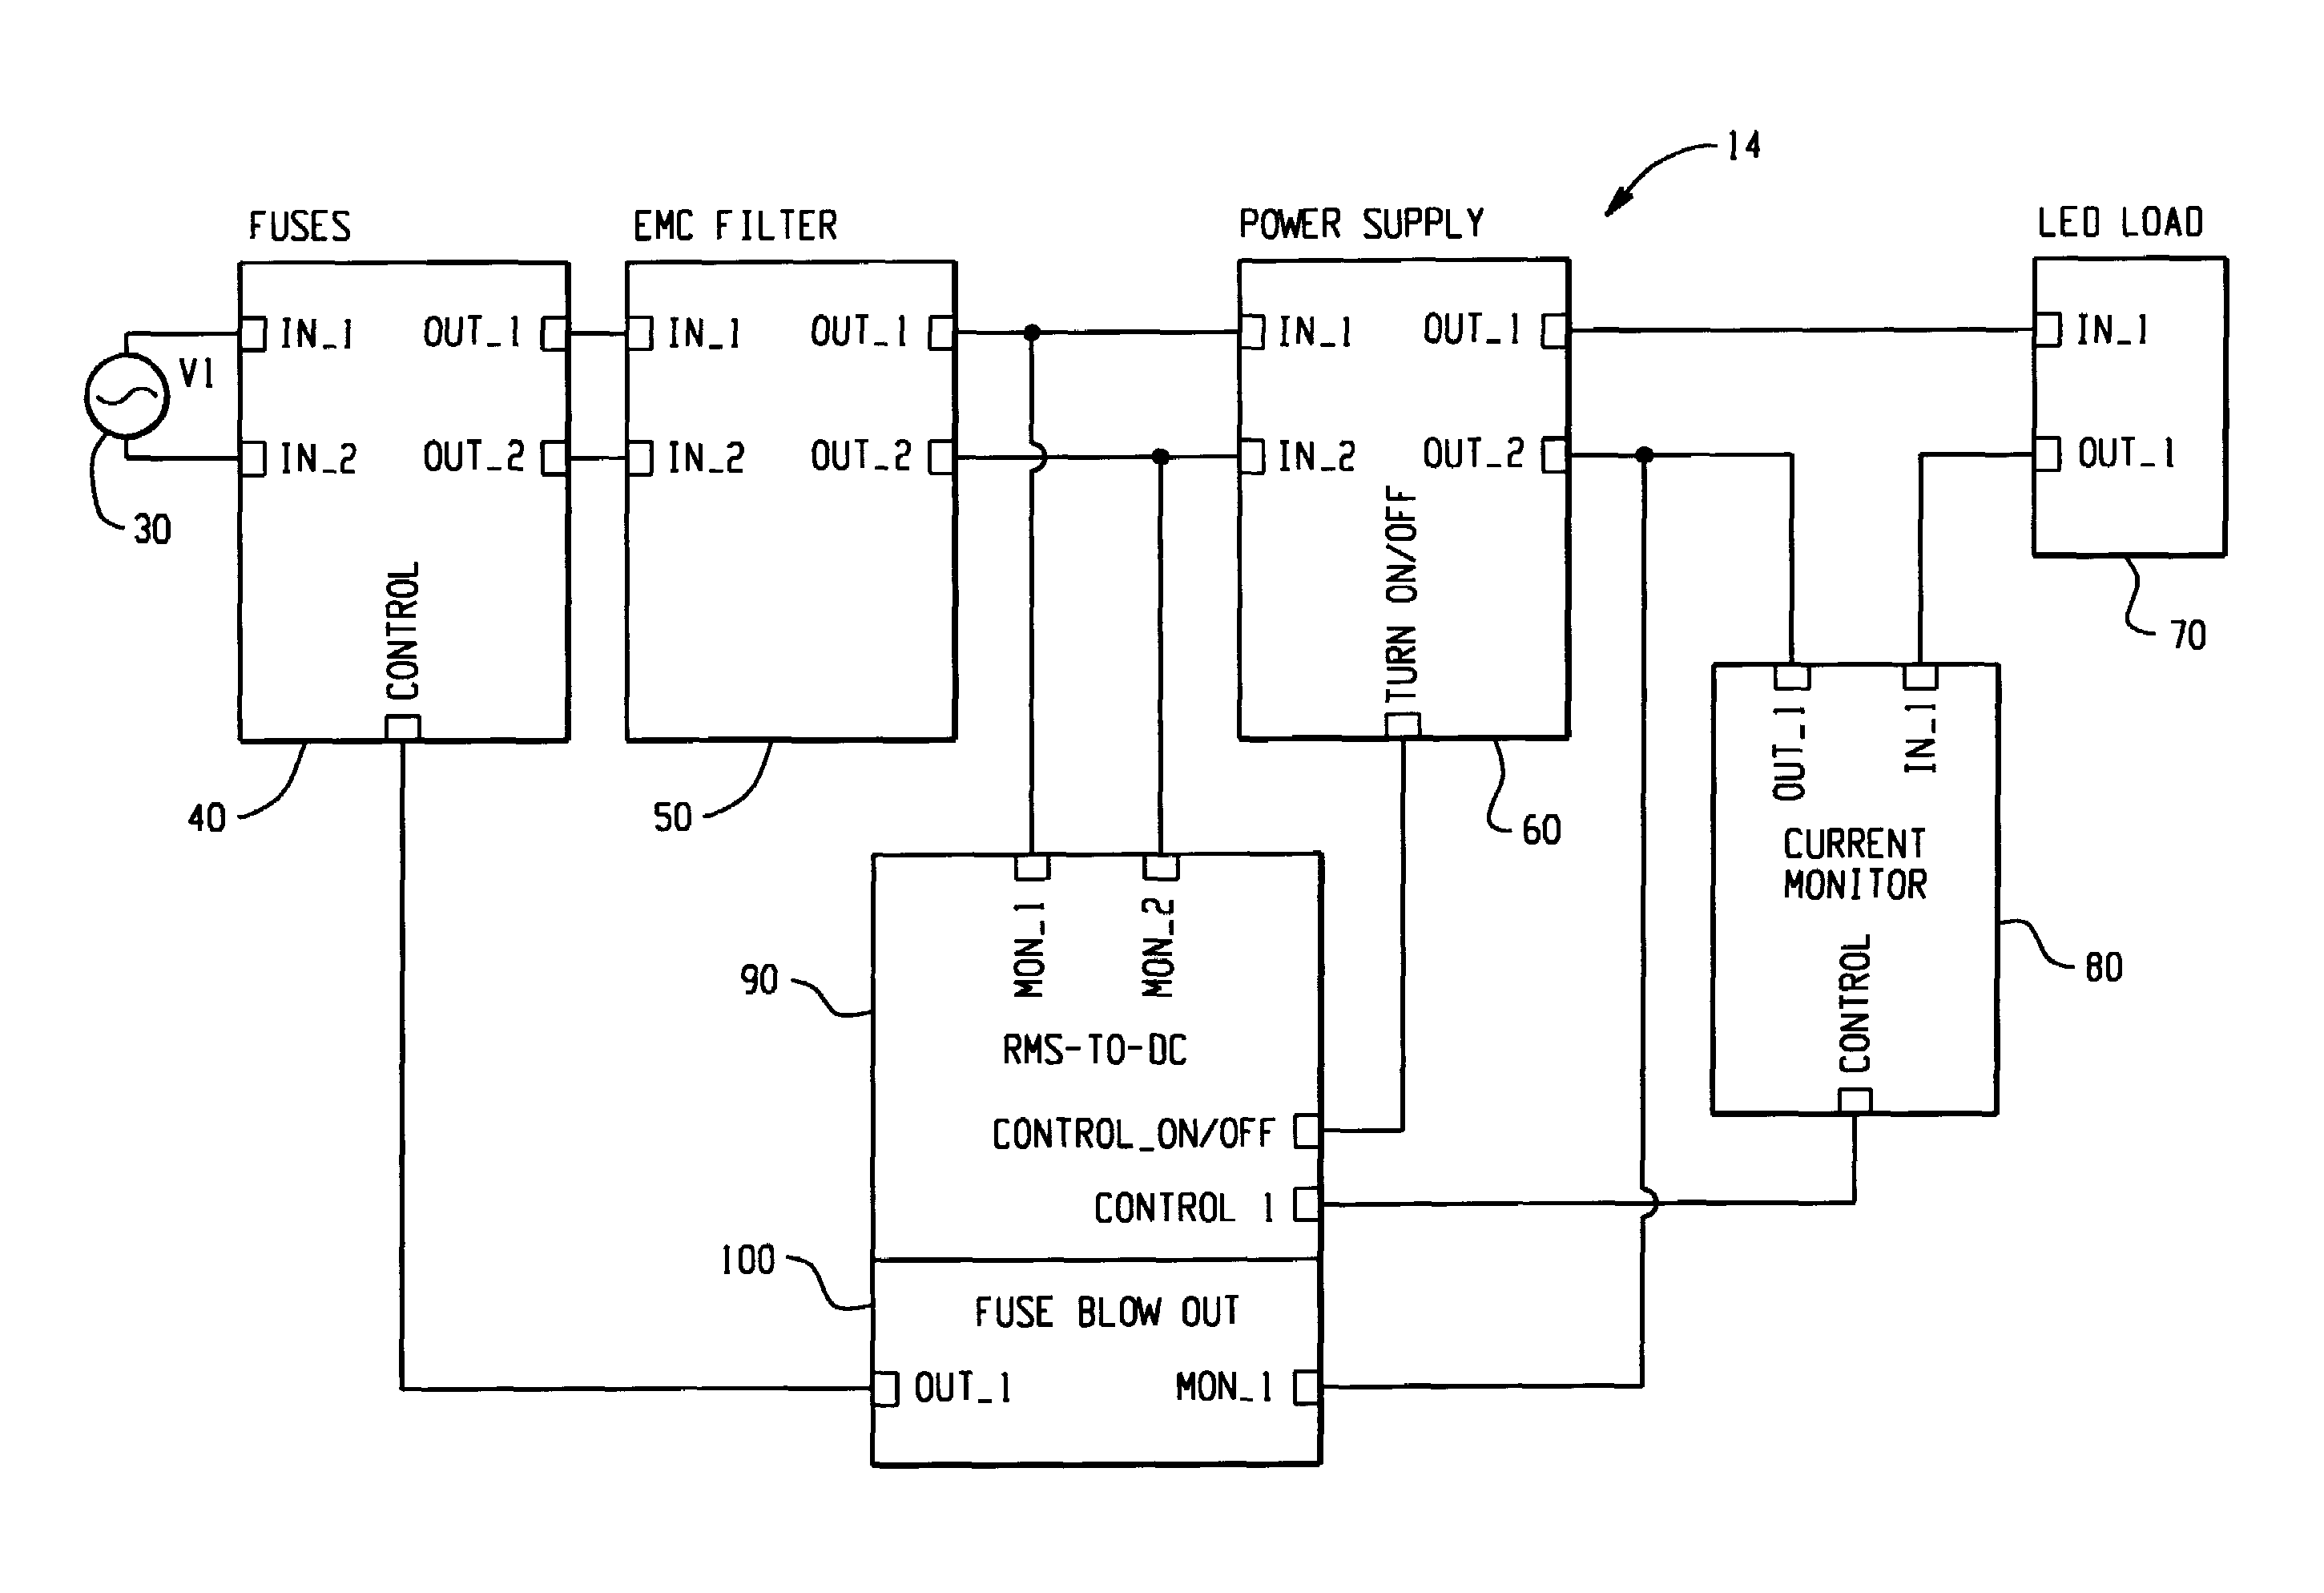 Power supply for LED signal